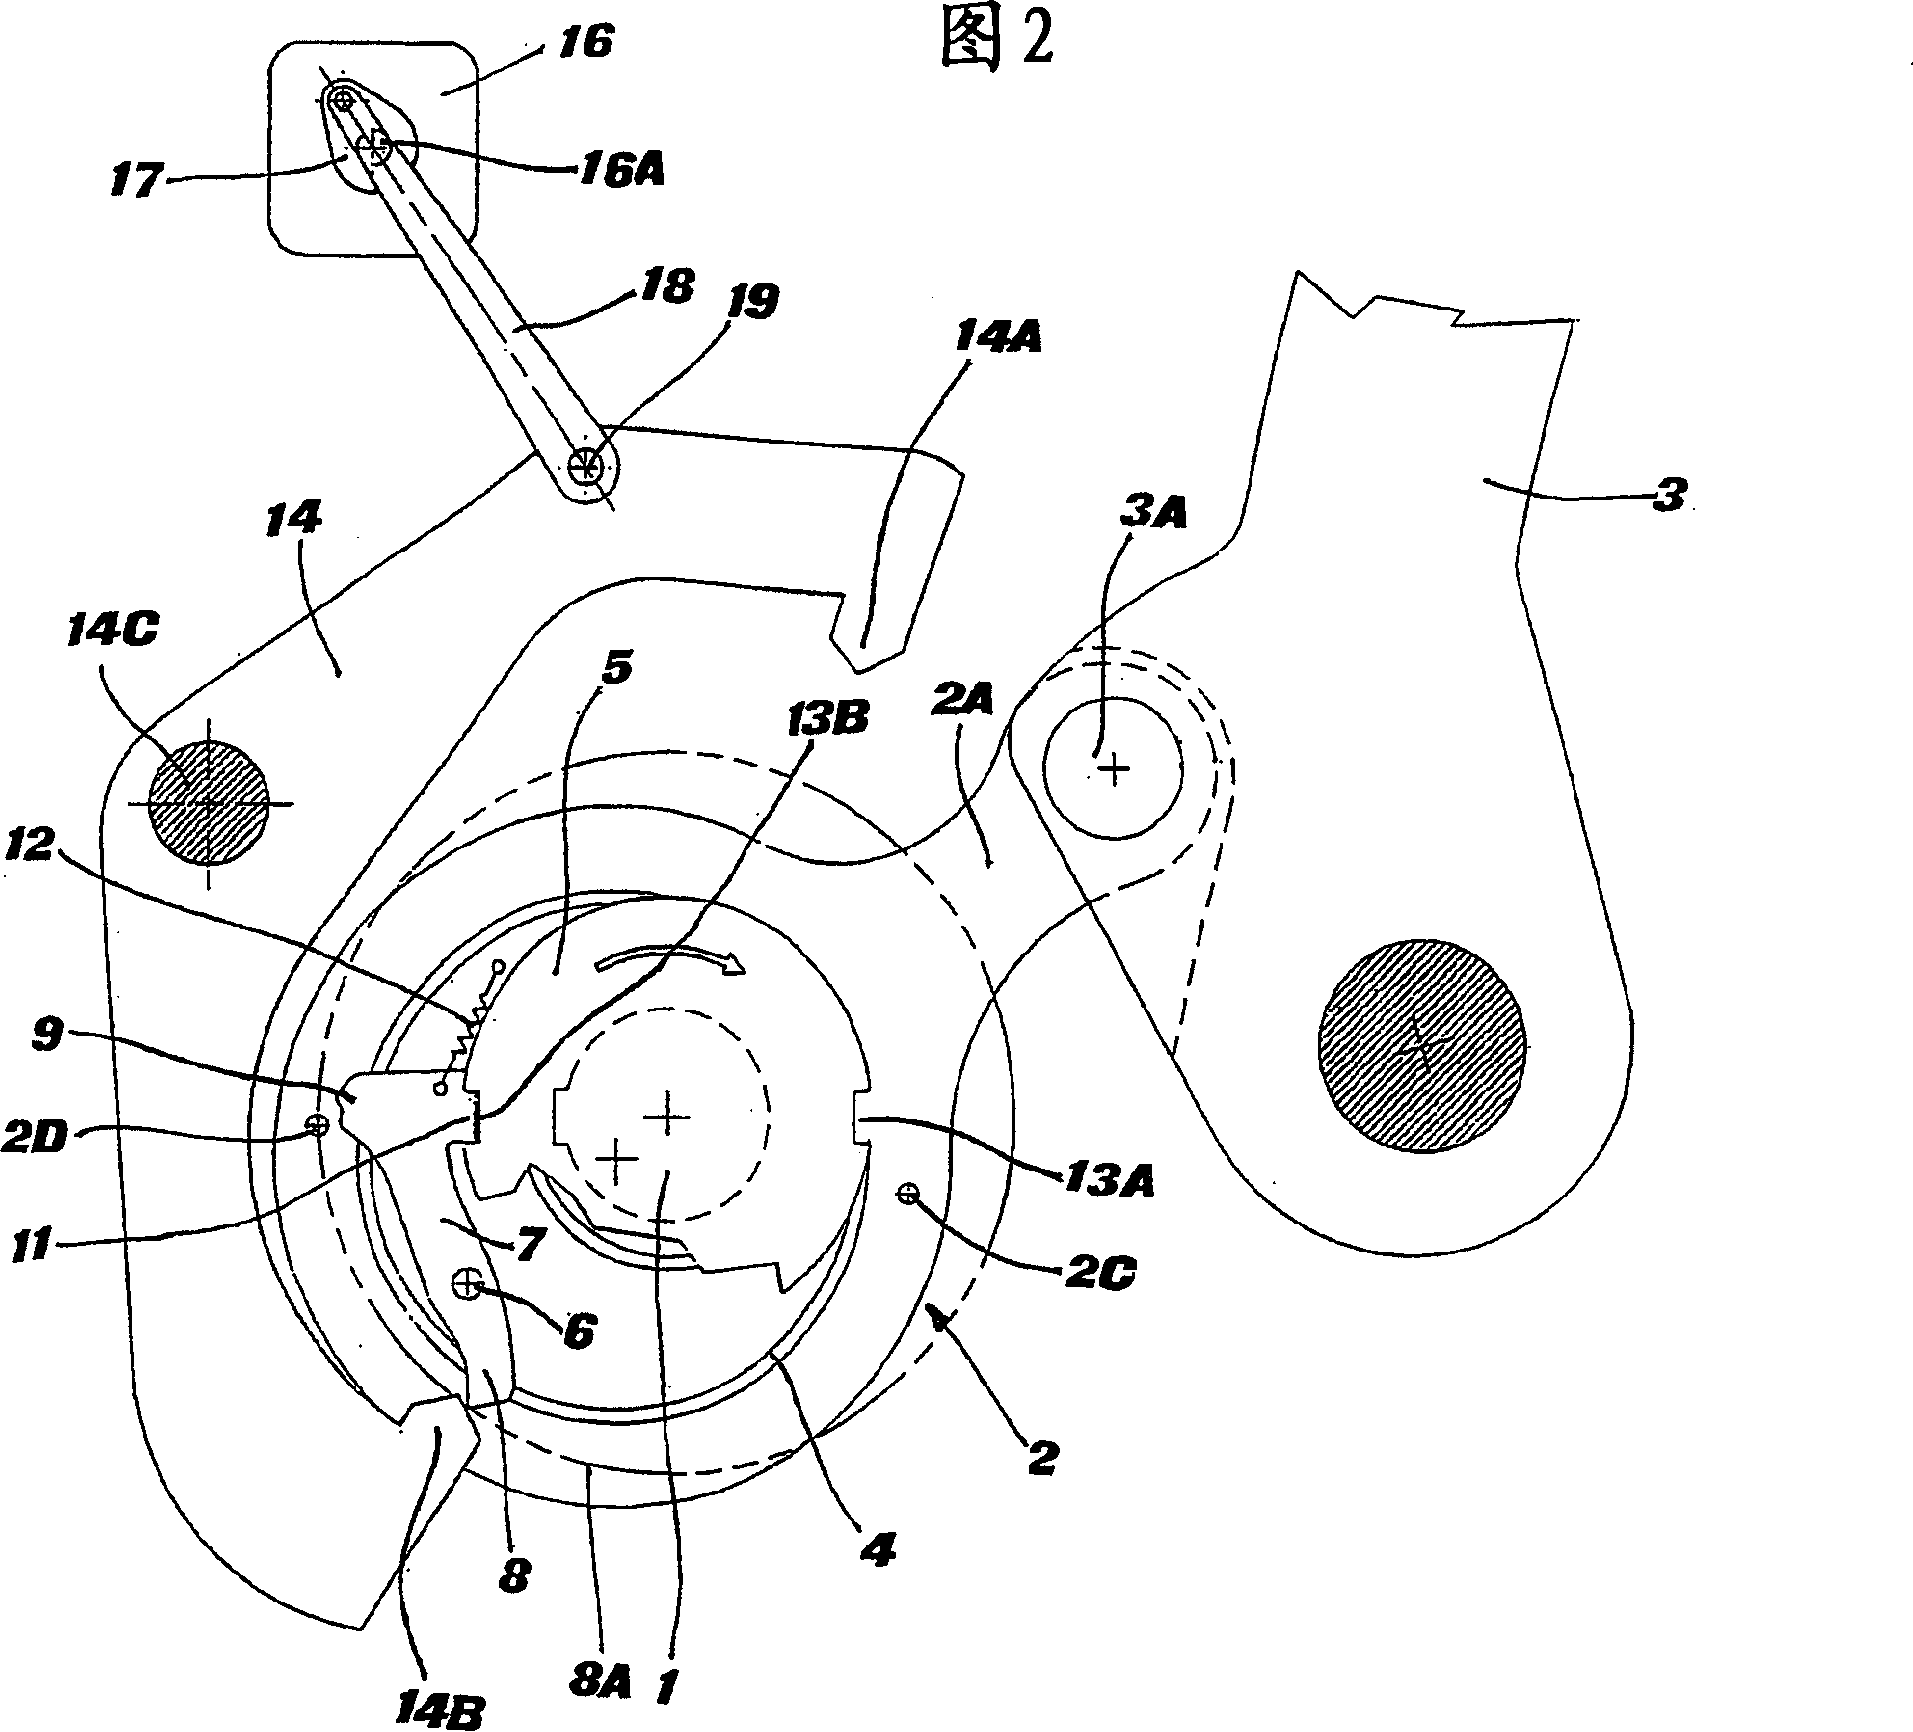 Device for carrying out the programming of rotary dobbies in weaving machines